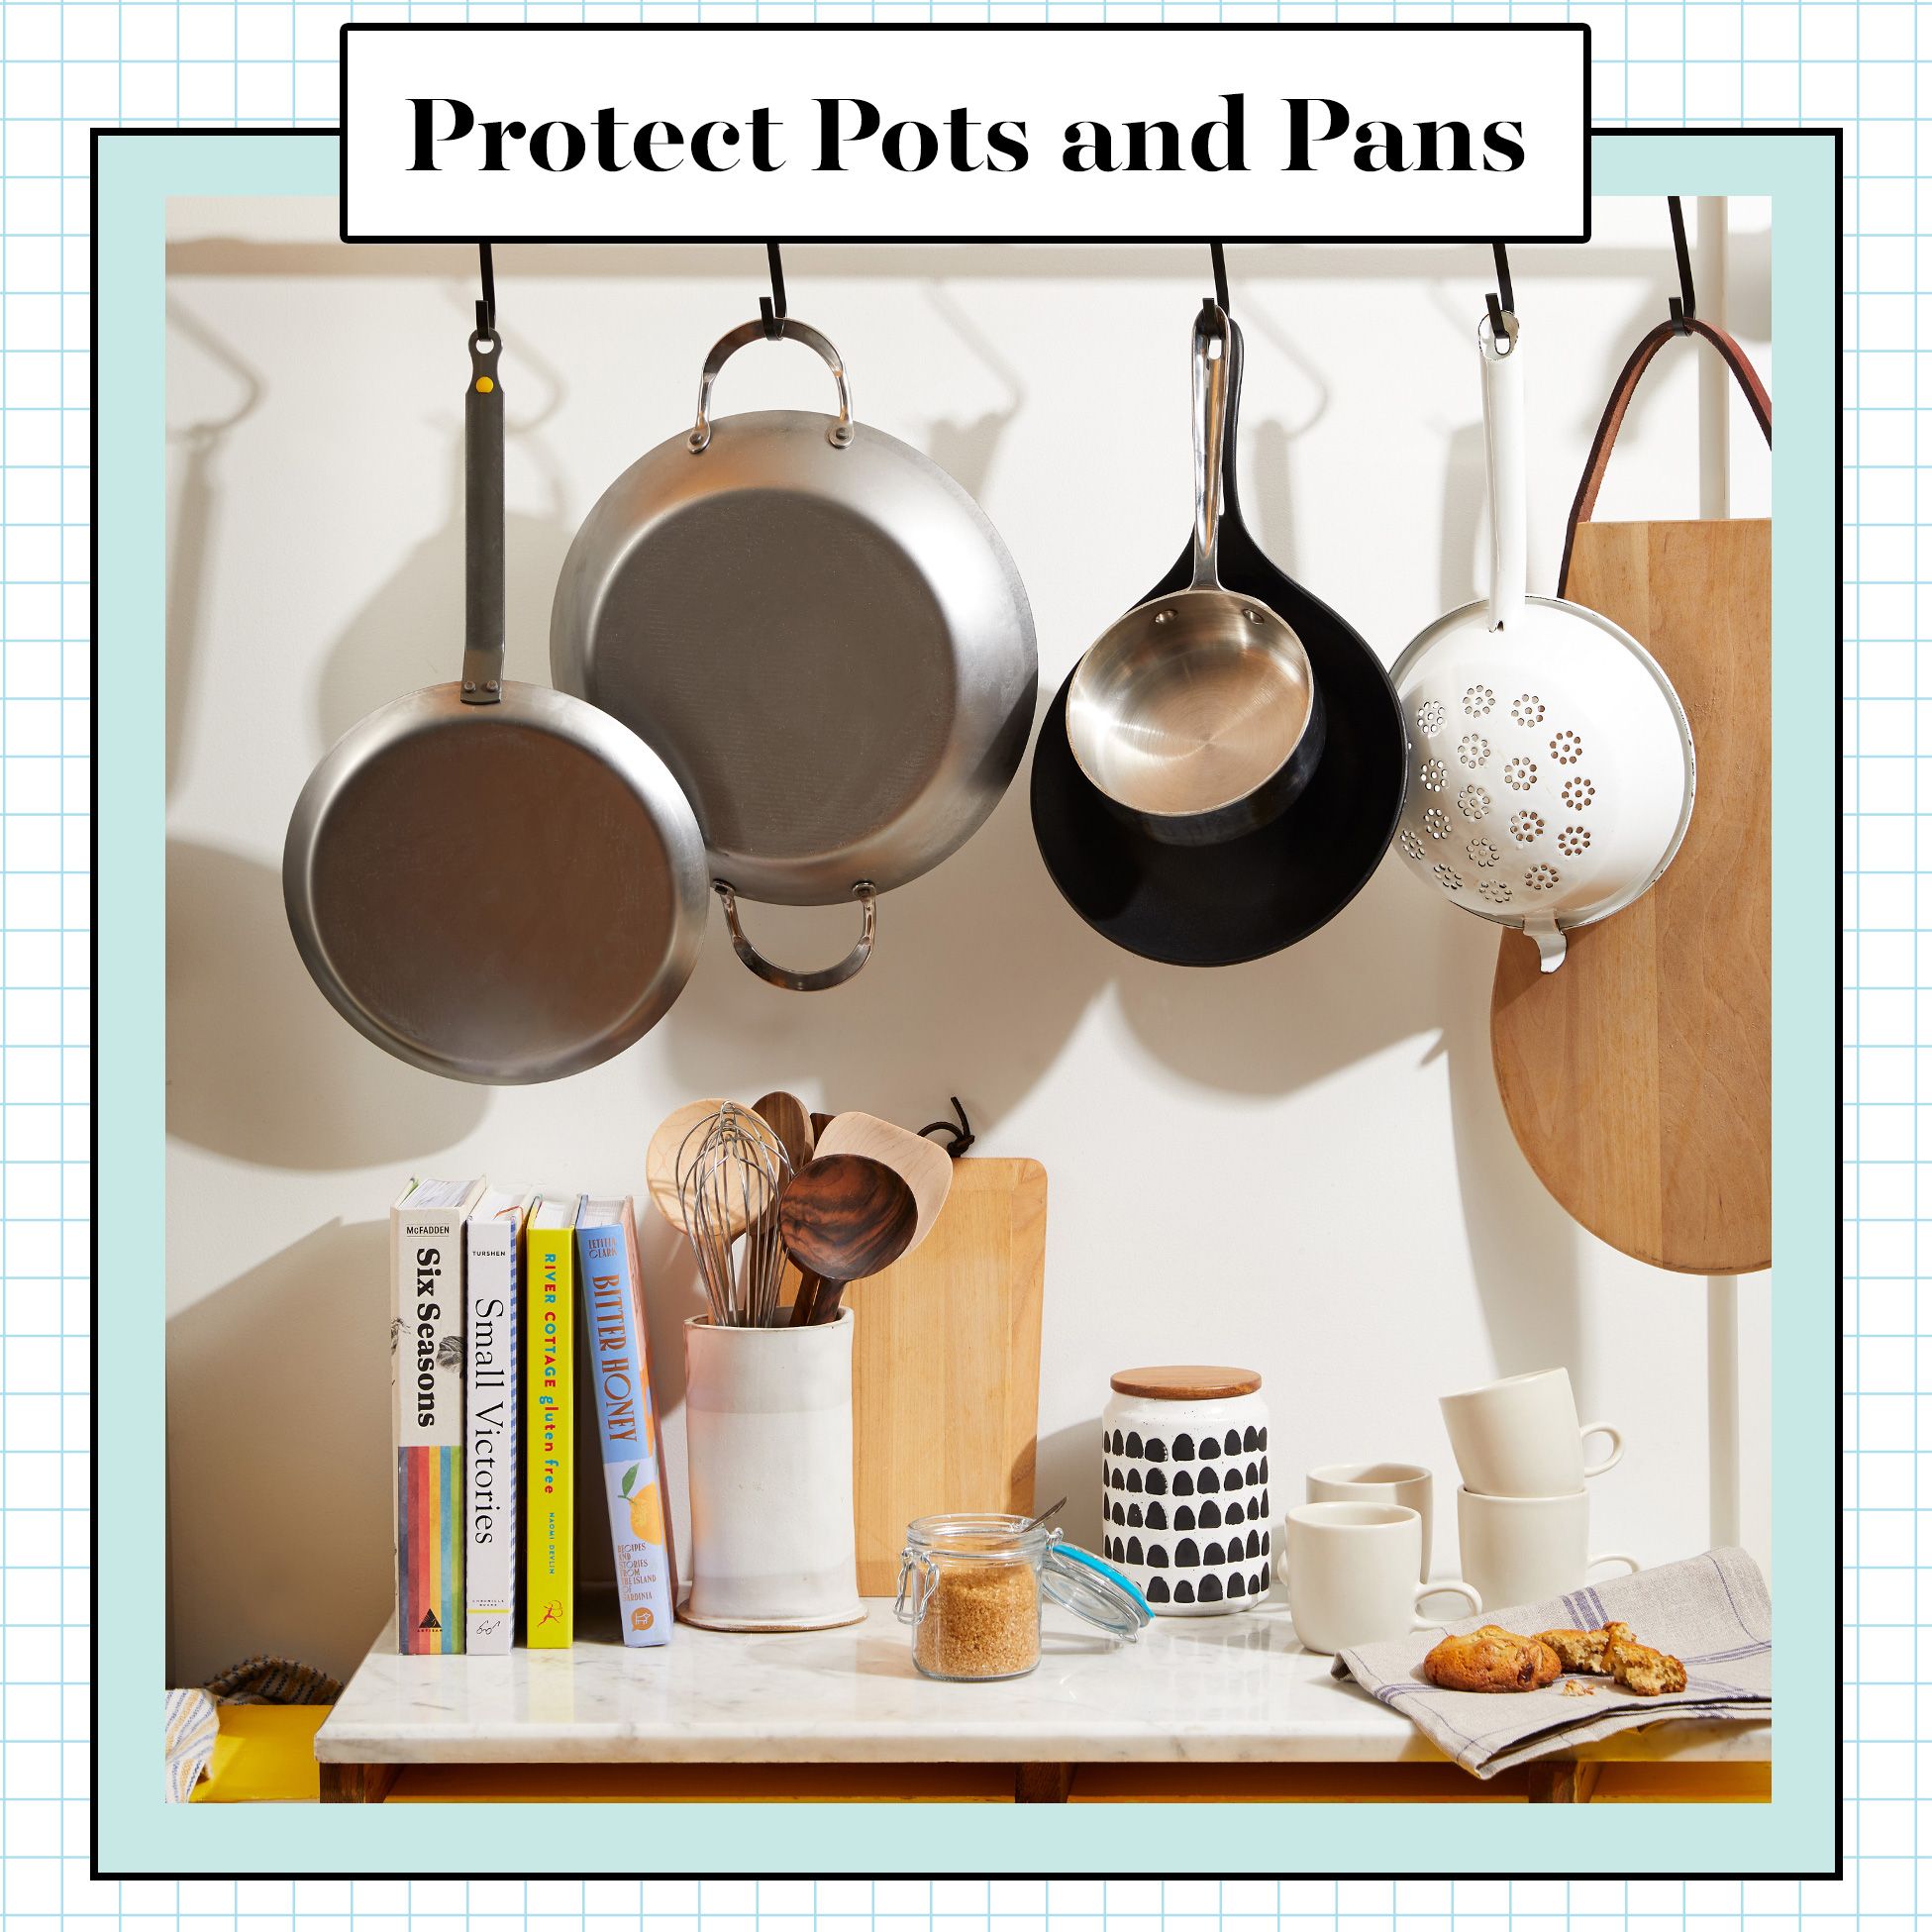 Wash the Right Way to Keep Pots and Pans Looking Brand-New